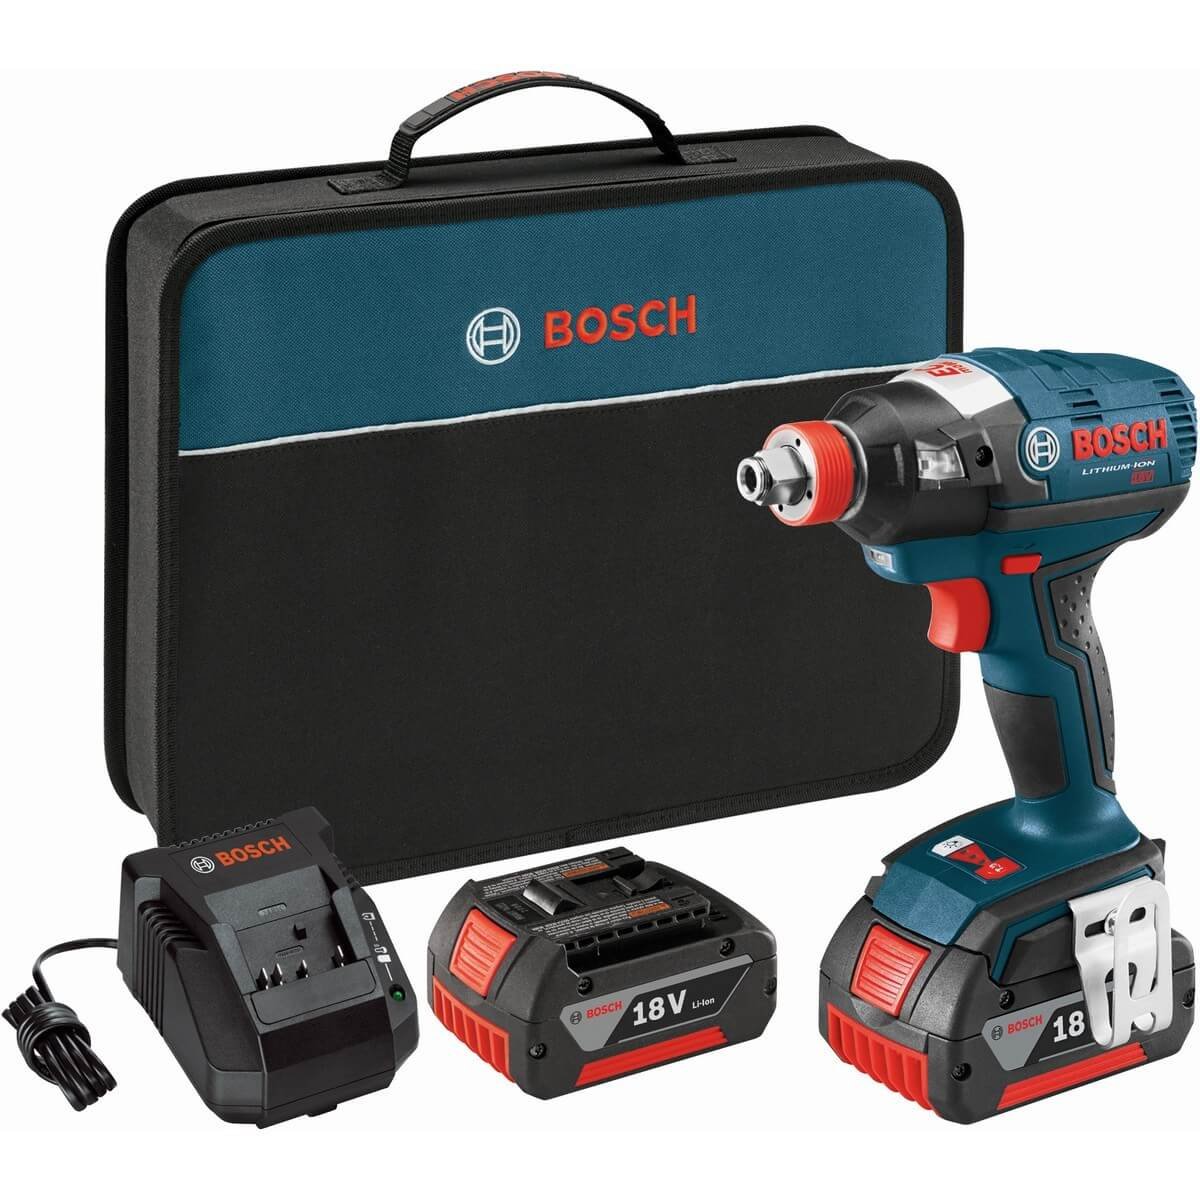 Bosch IDH182-01 18V Brushless Socket Ready Impact Driver with 2 Batteries, Charg